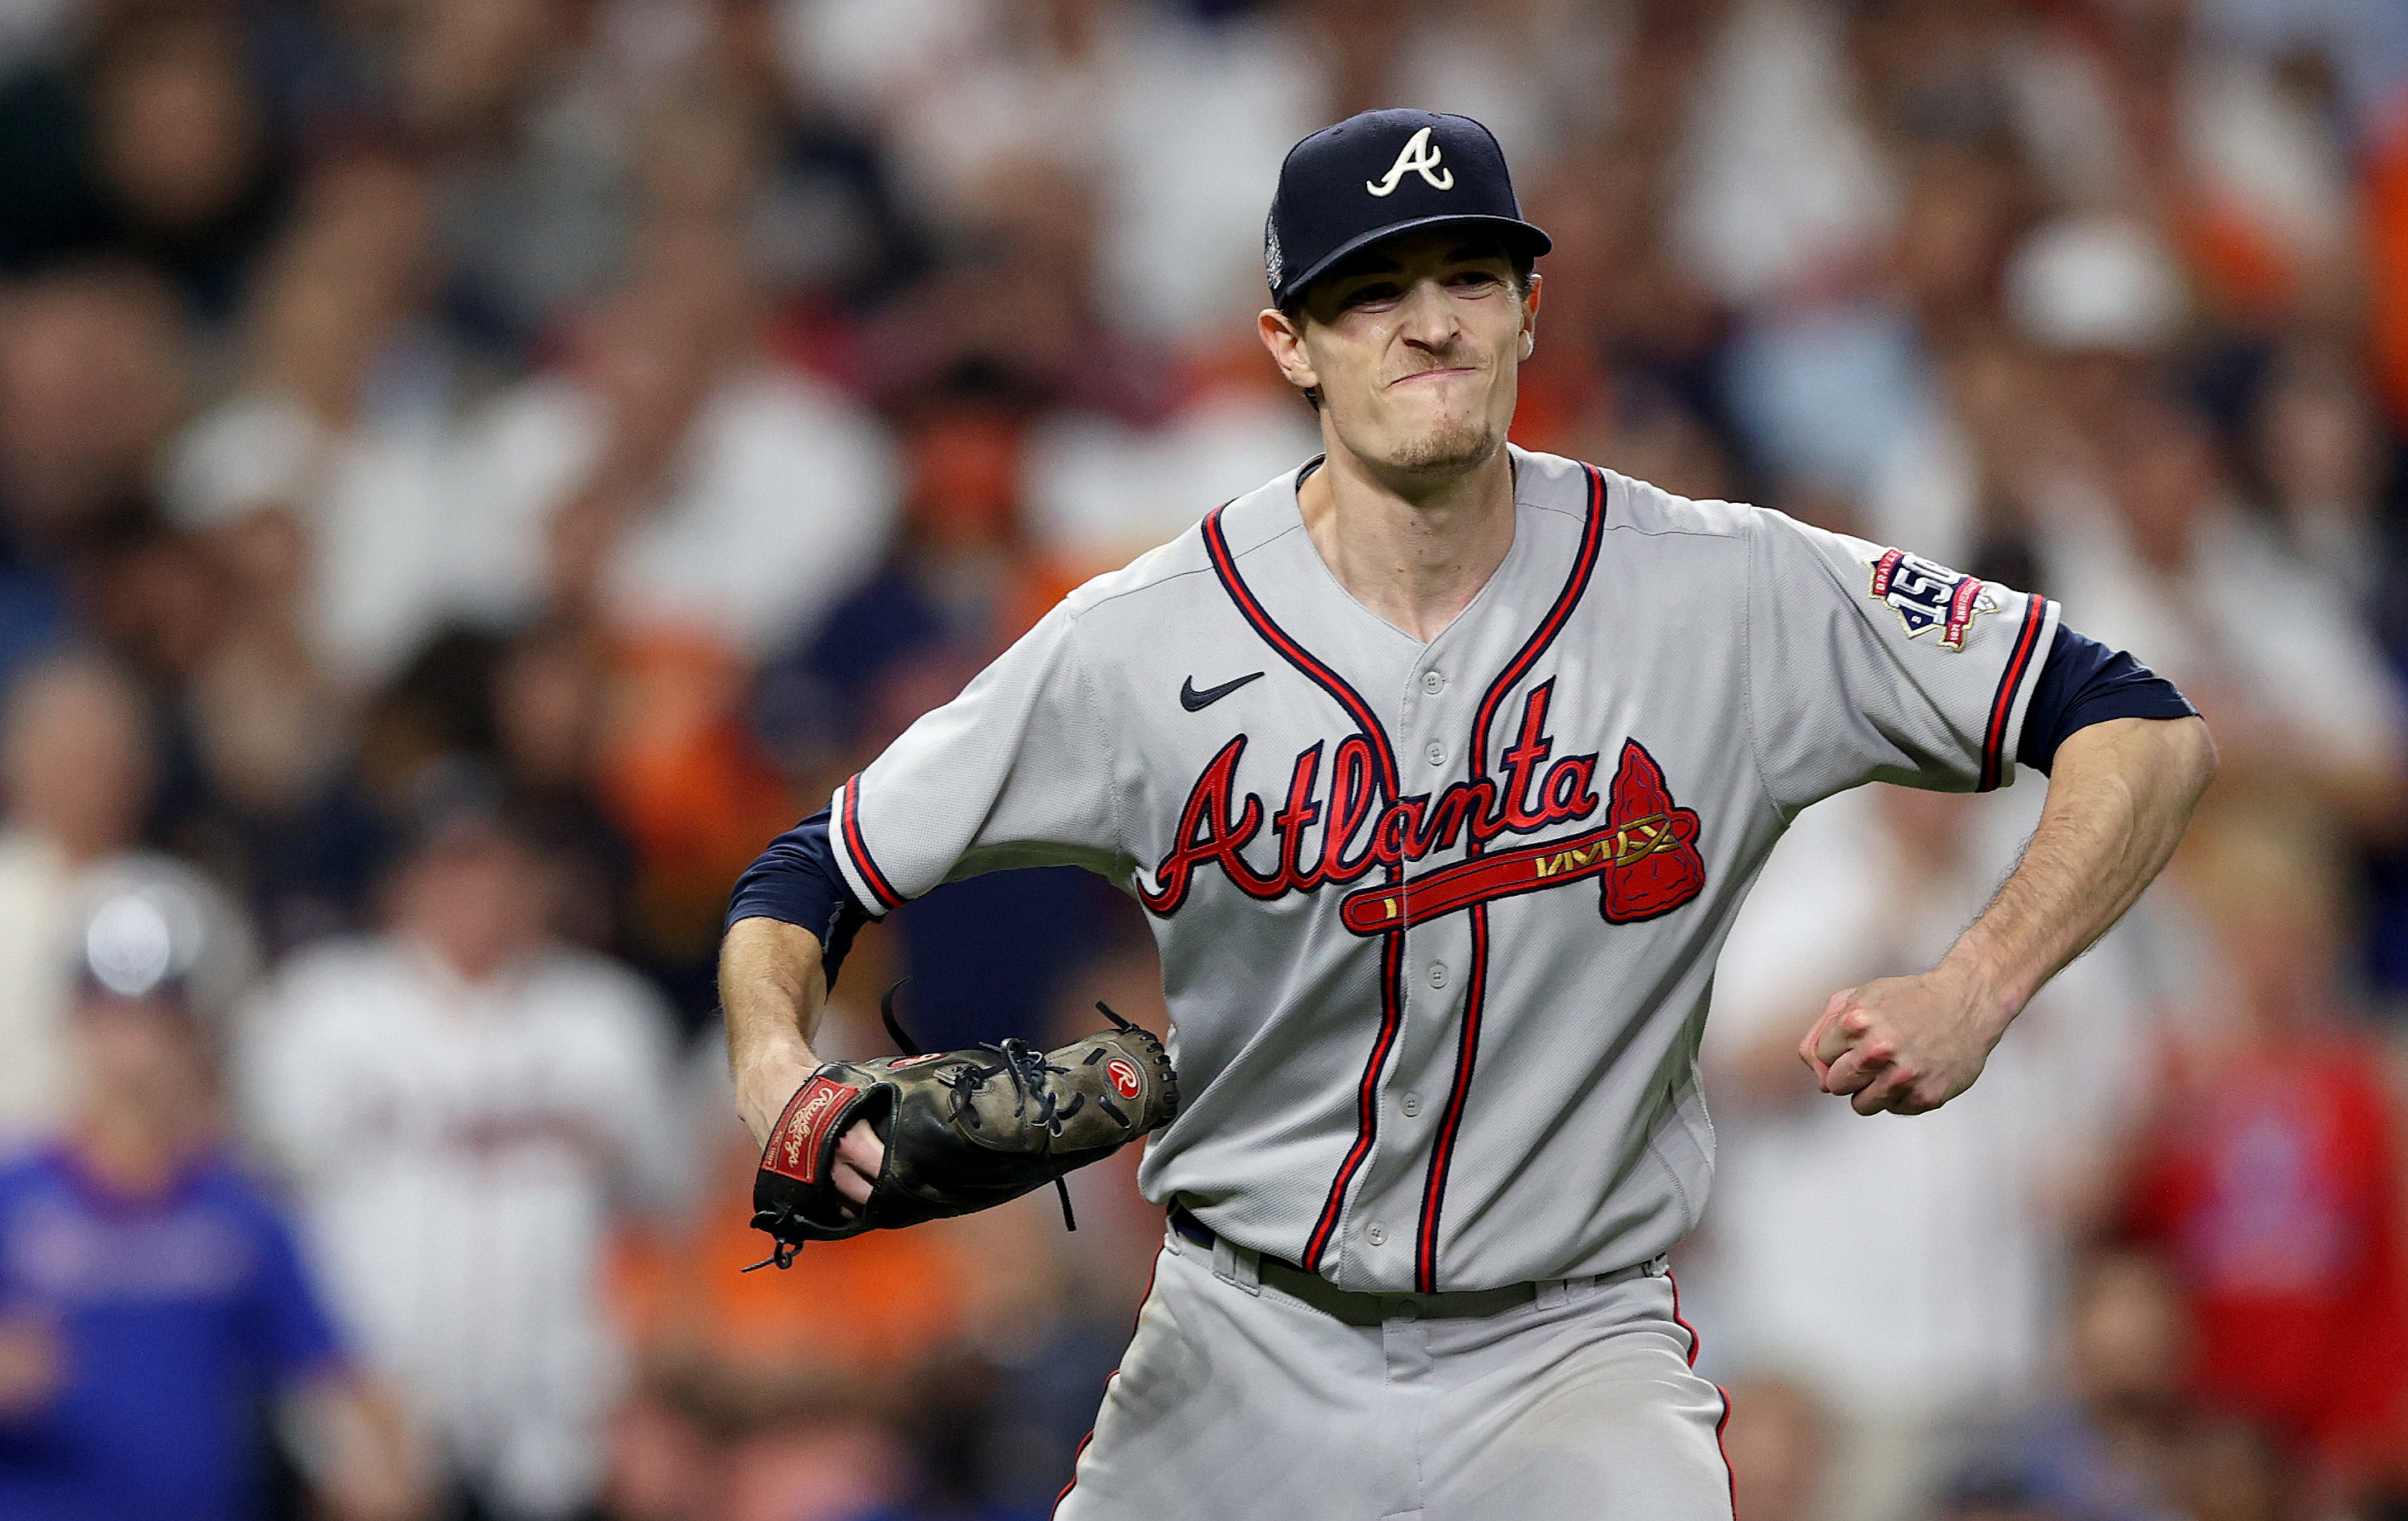 Atlanta Braves win their first World Series since 1995